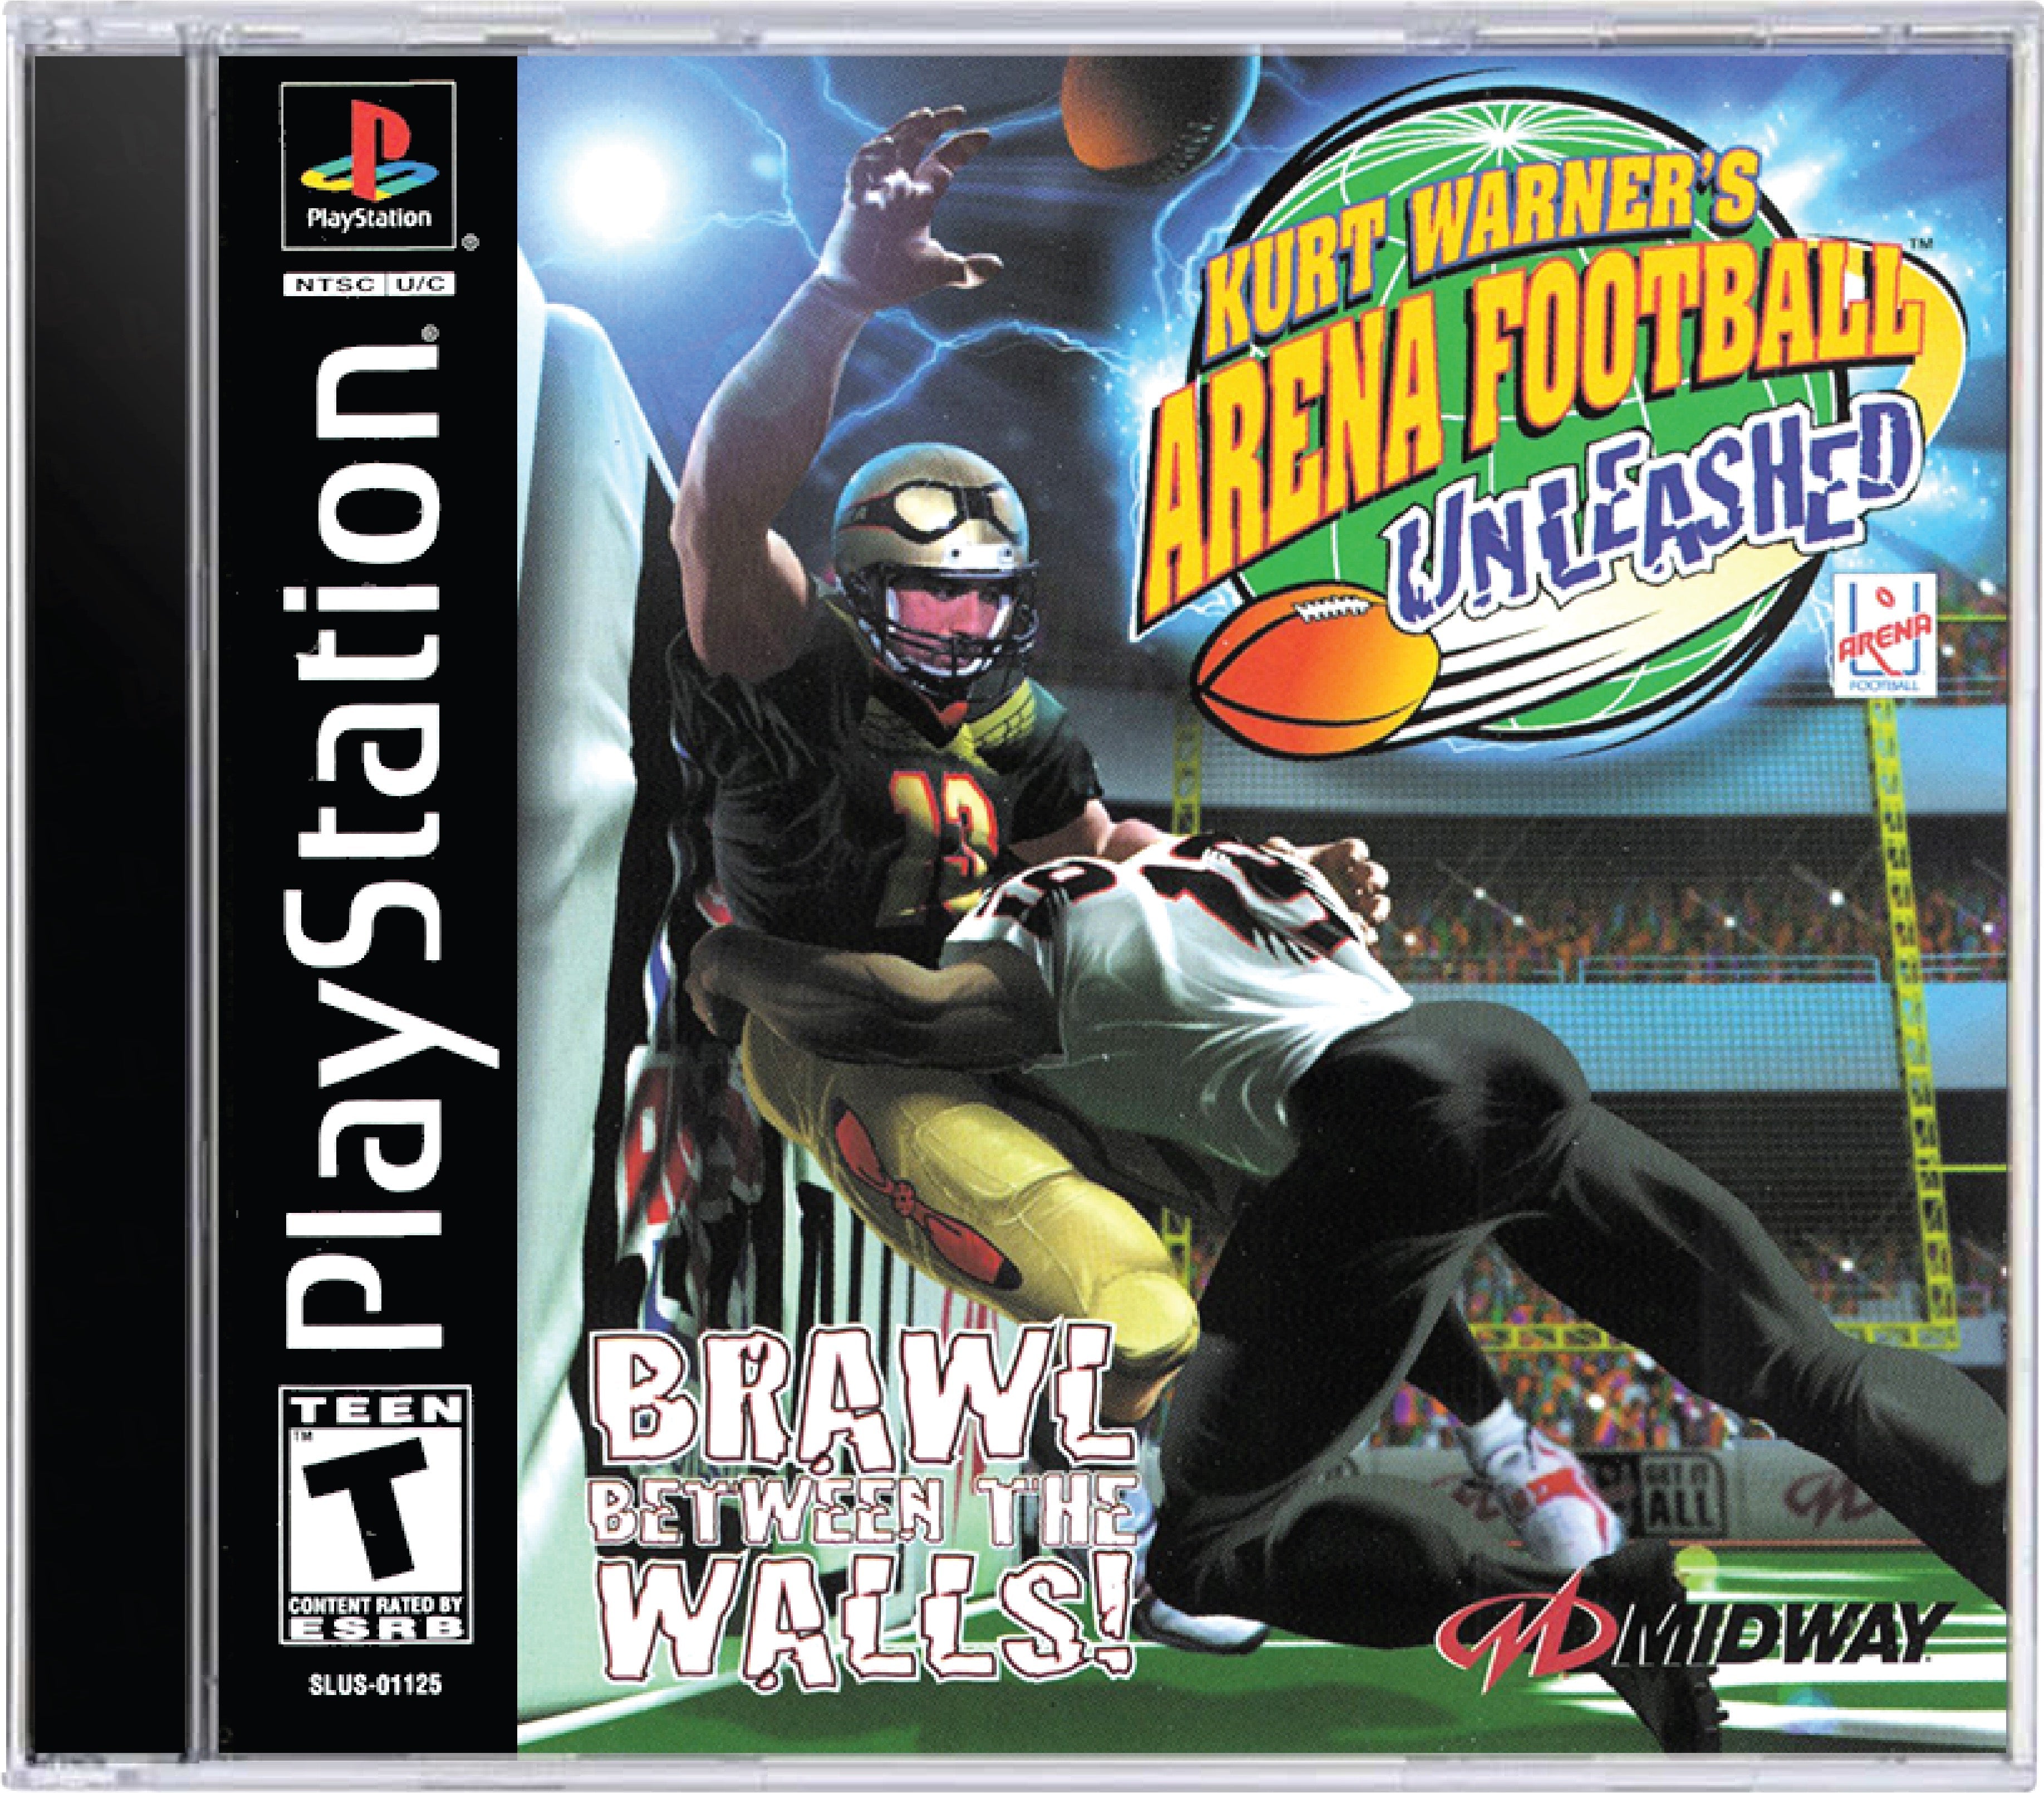 Kurt Warner's Arena Football Unleashed Cover Art and Product Photo